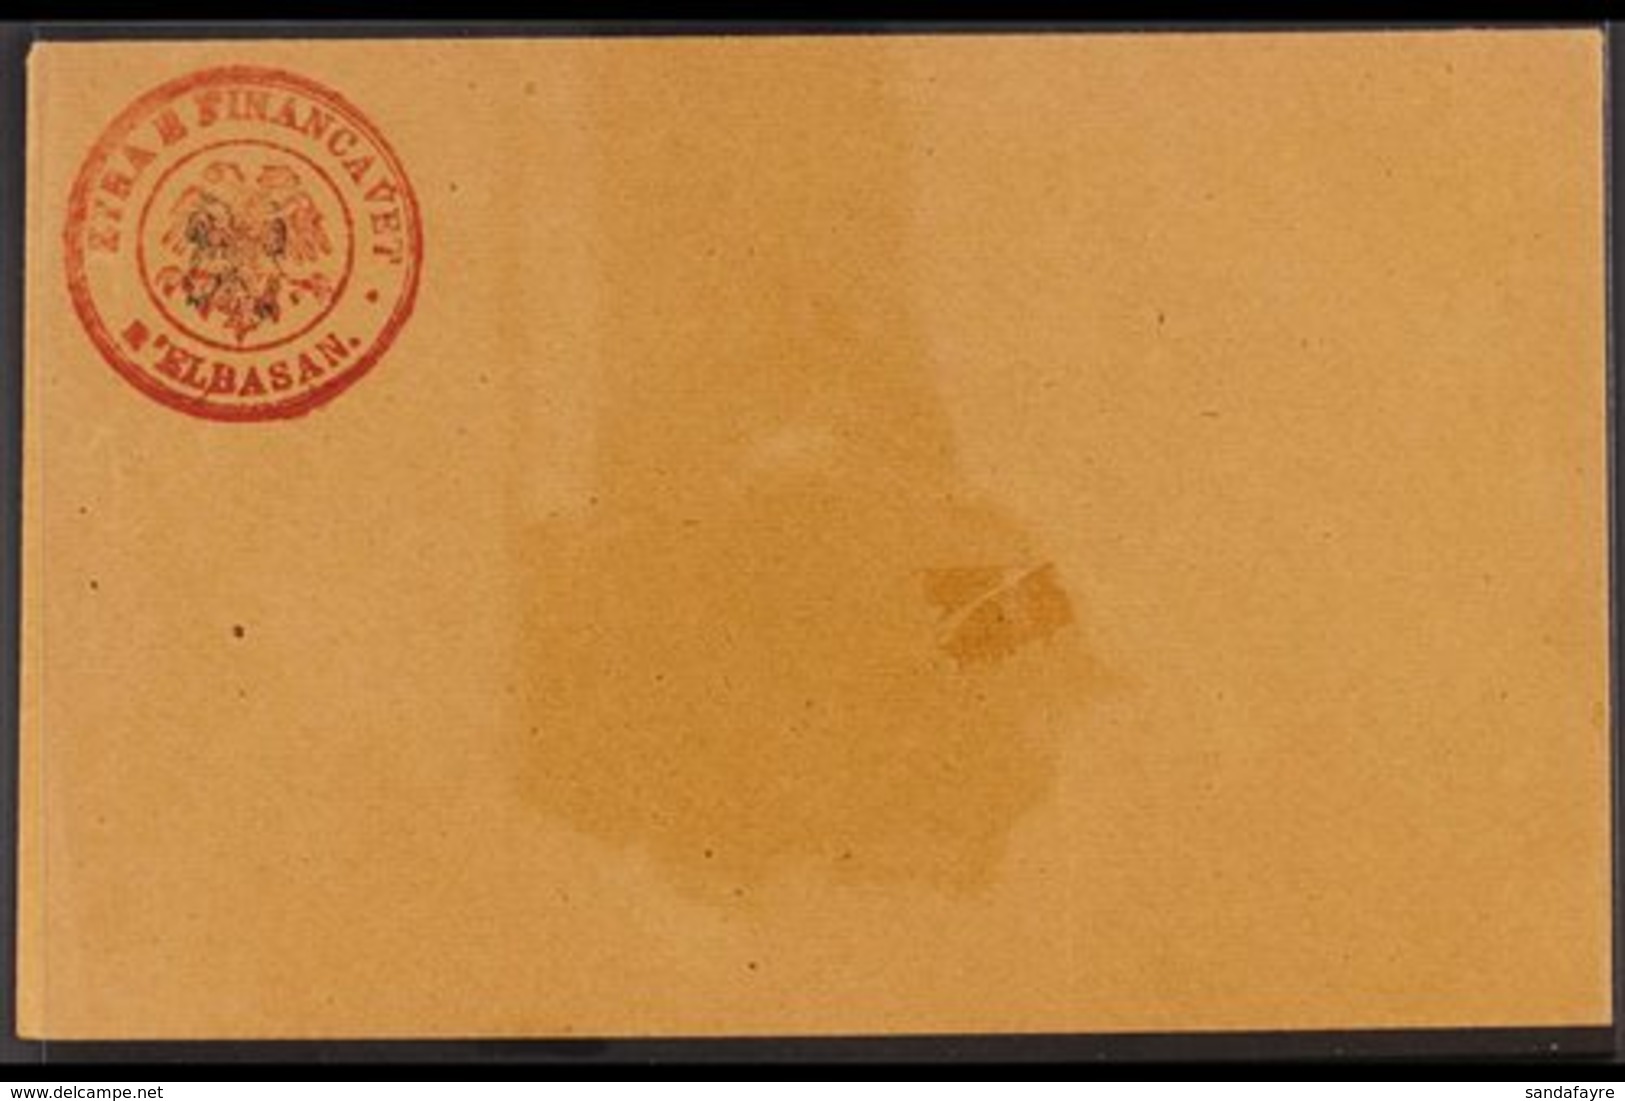 1919 DURRES GOVERNMENT POST.  1919 (1 Gr) Postal Stationery Envelope, Michel U1, Very Fine Unused With Small Mark On Fro - Albania